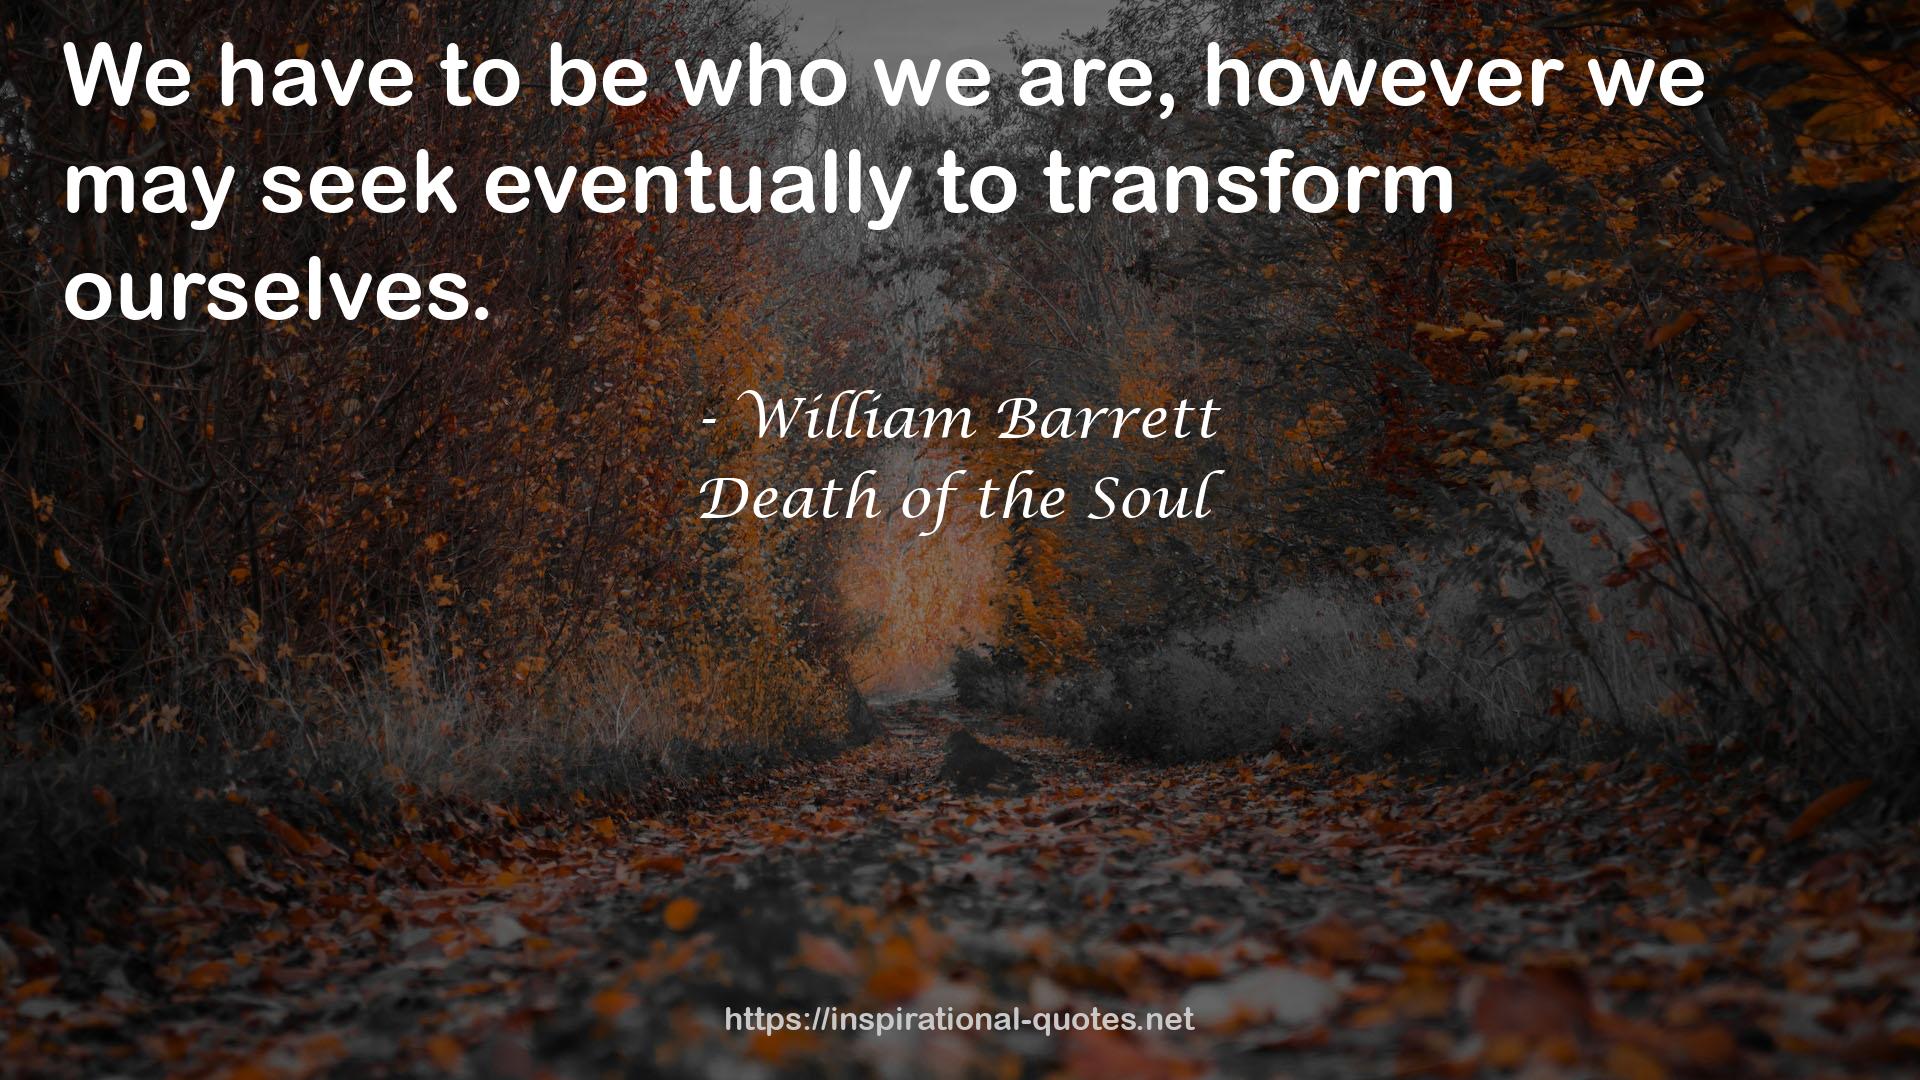 Death of the Soul QUOTES